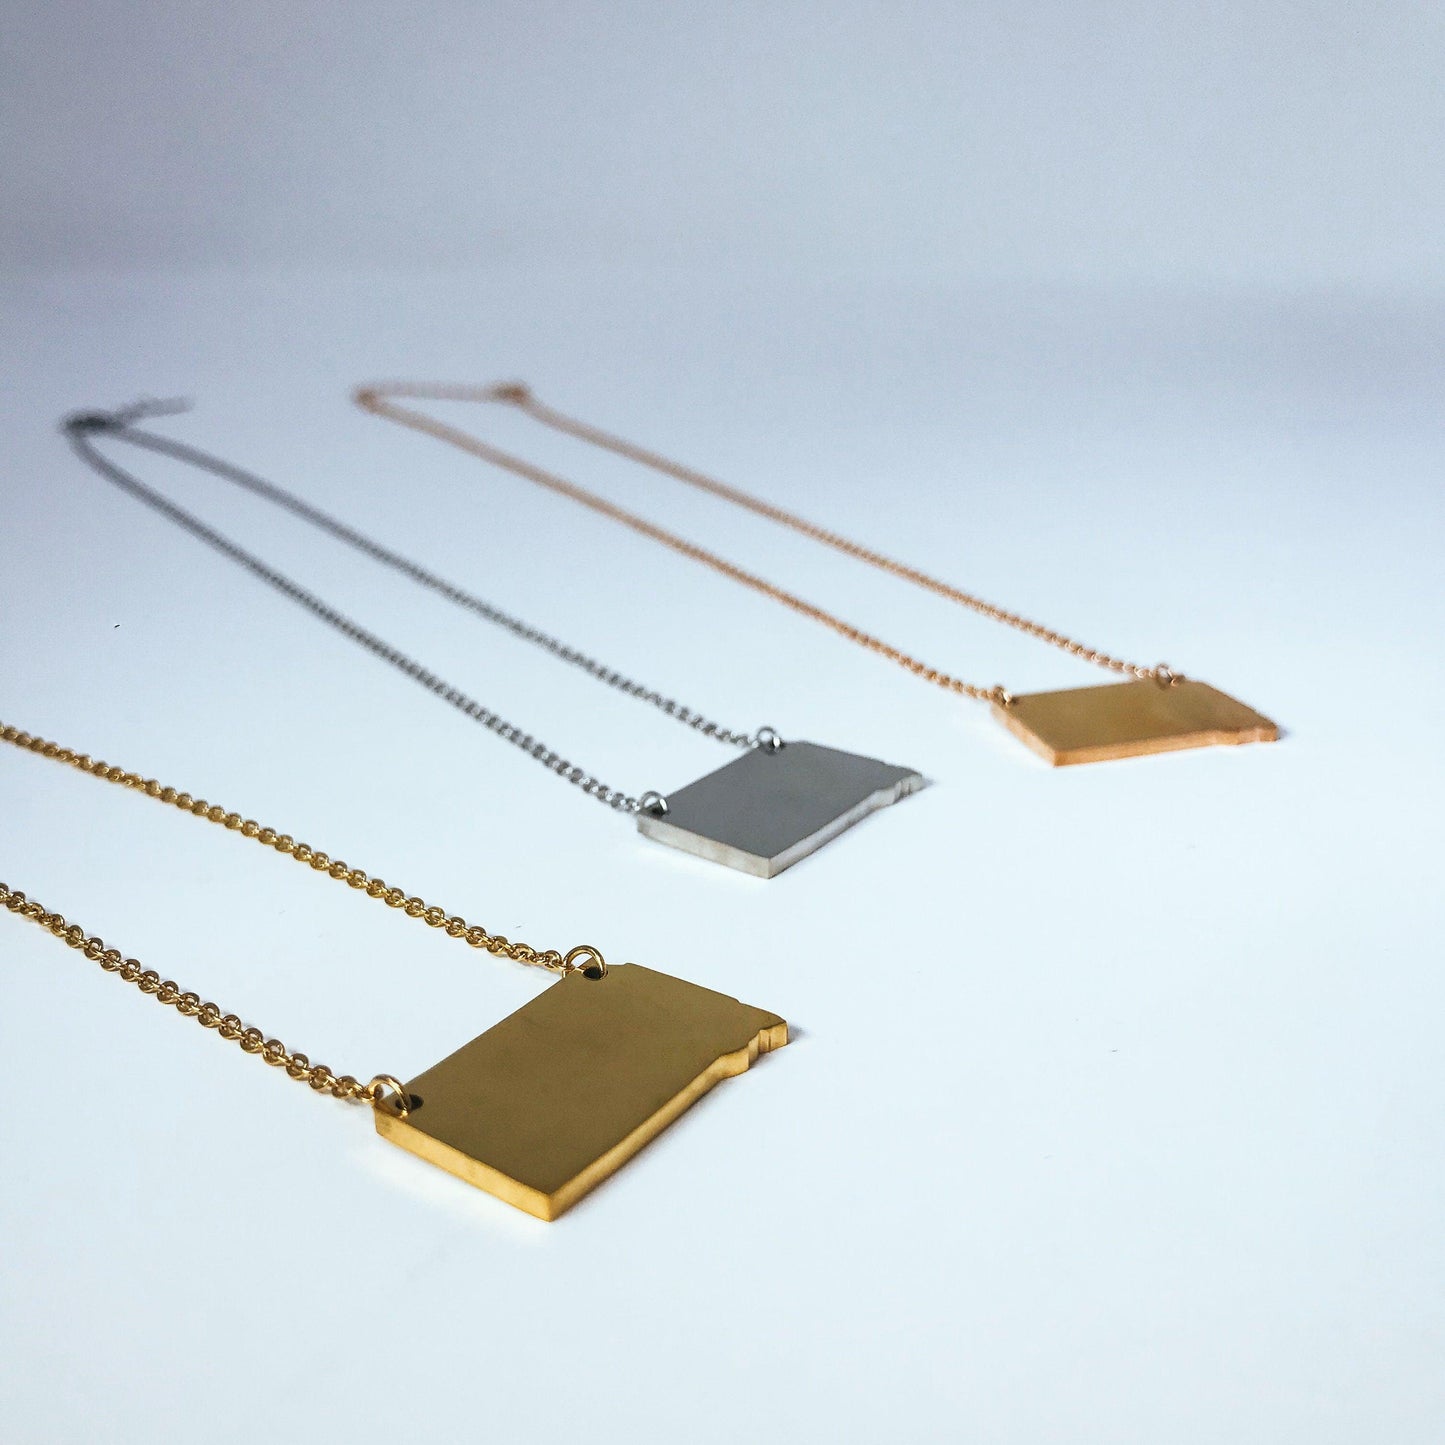 South Dakota State Silhouette Necklaces in 3 different colors: Gold, Silver & Rose Gold